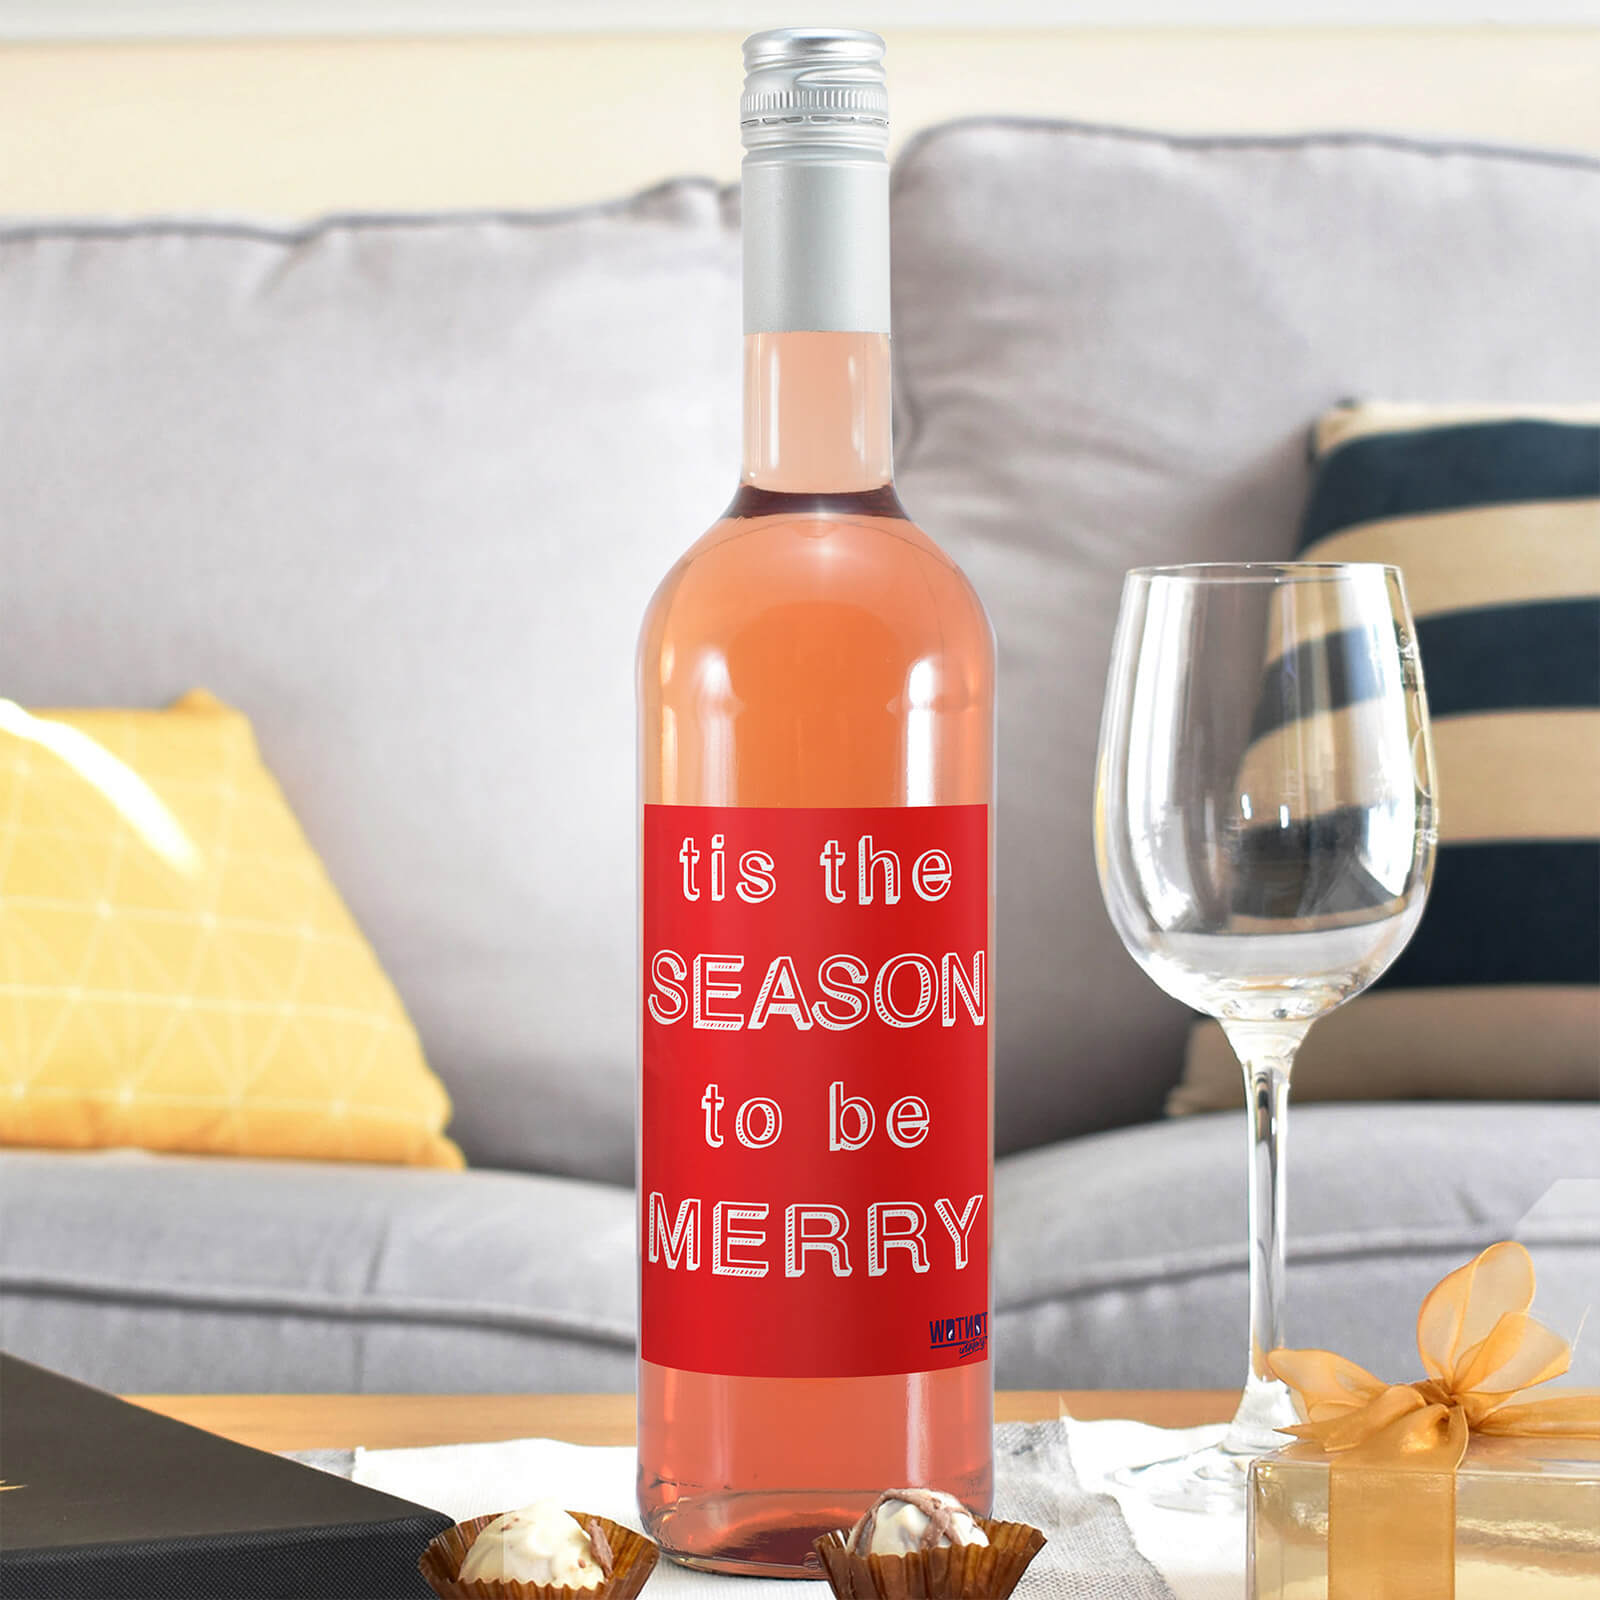 WotNot Creations 'Tis the Season to be Merry' Wine - Rose